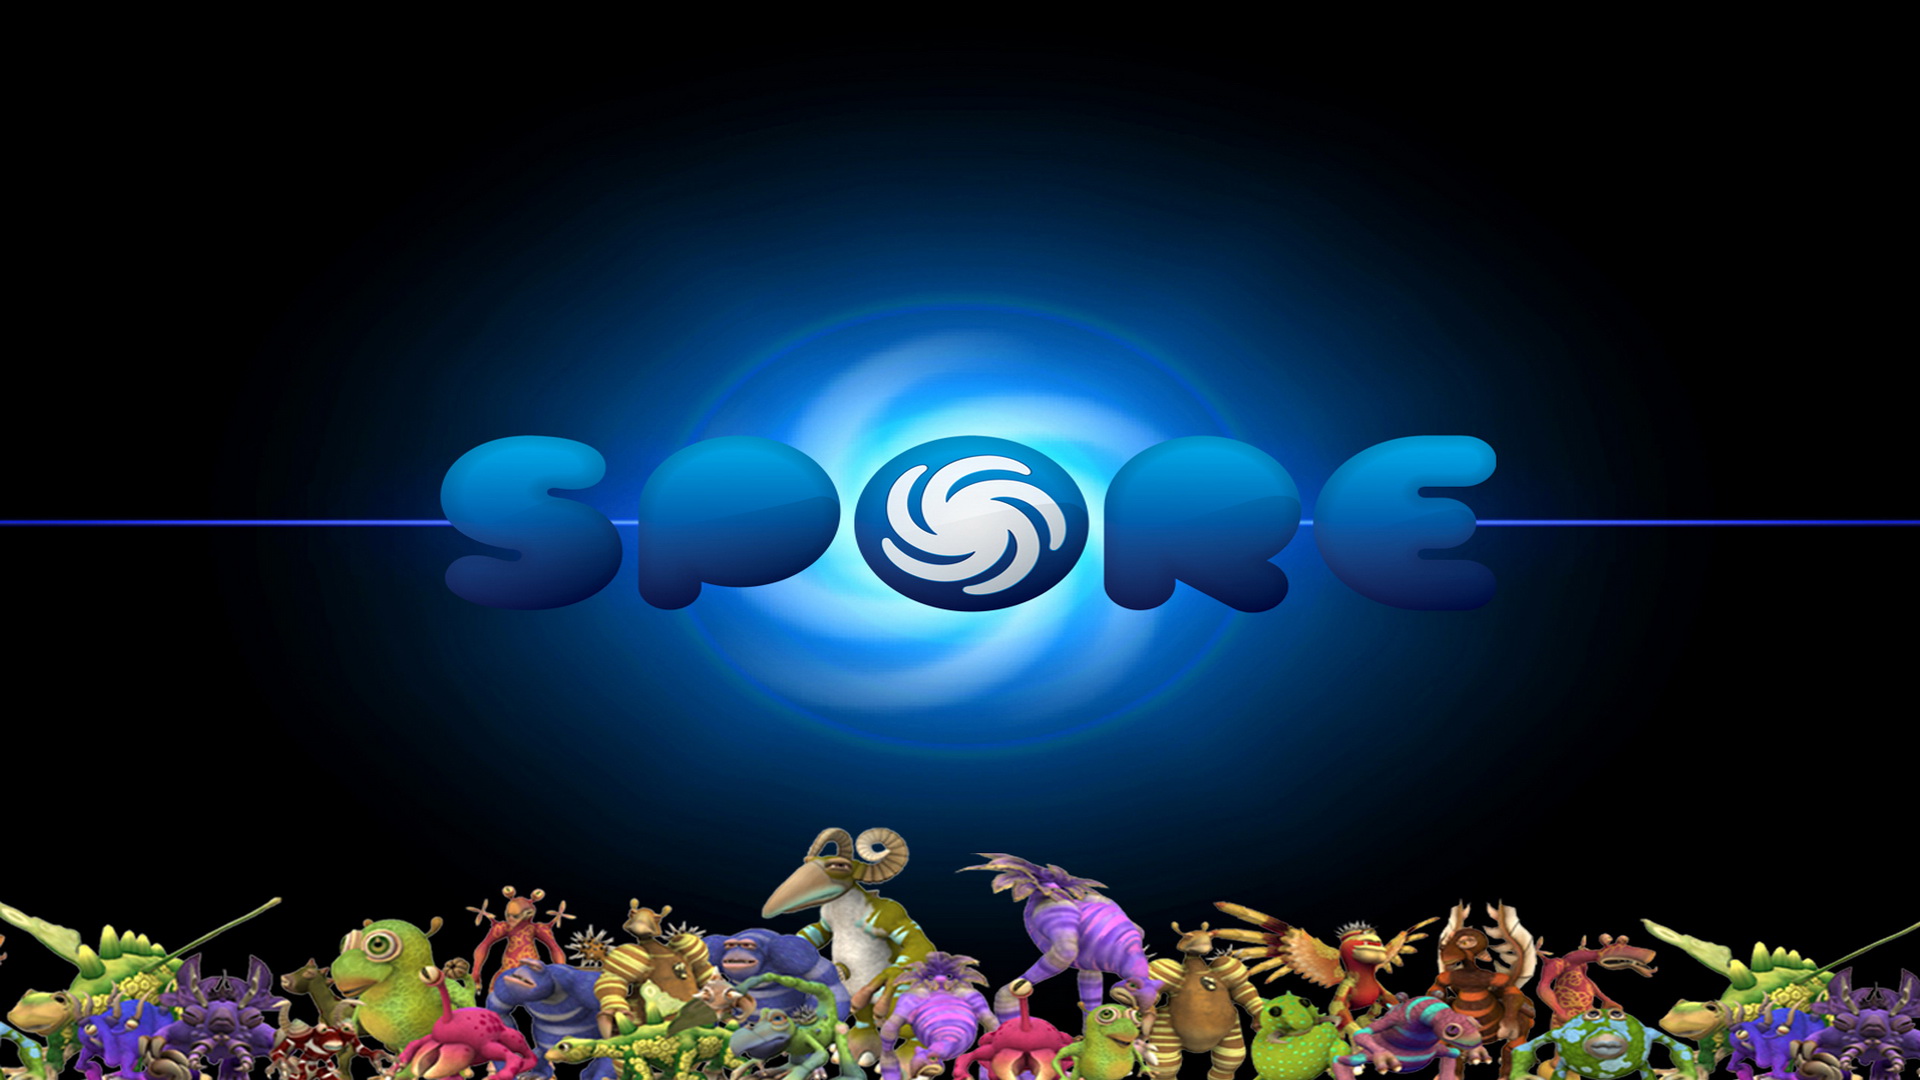 Games Wallpaper Game HD Background Spore Pc